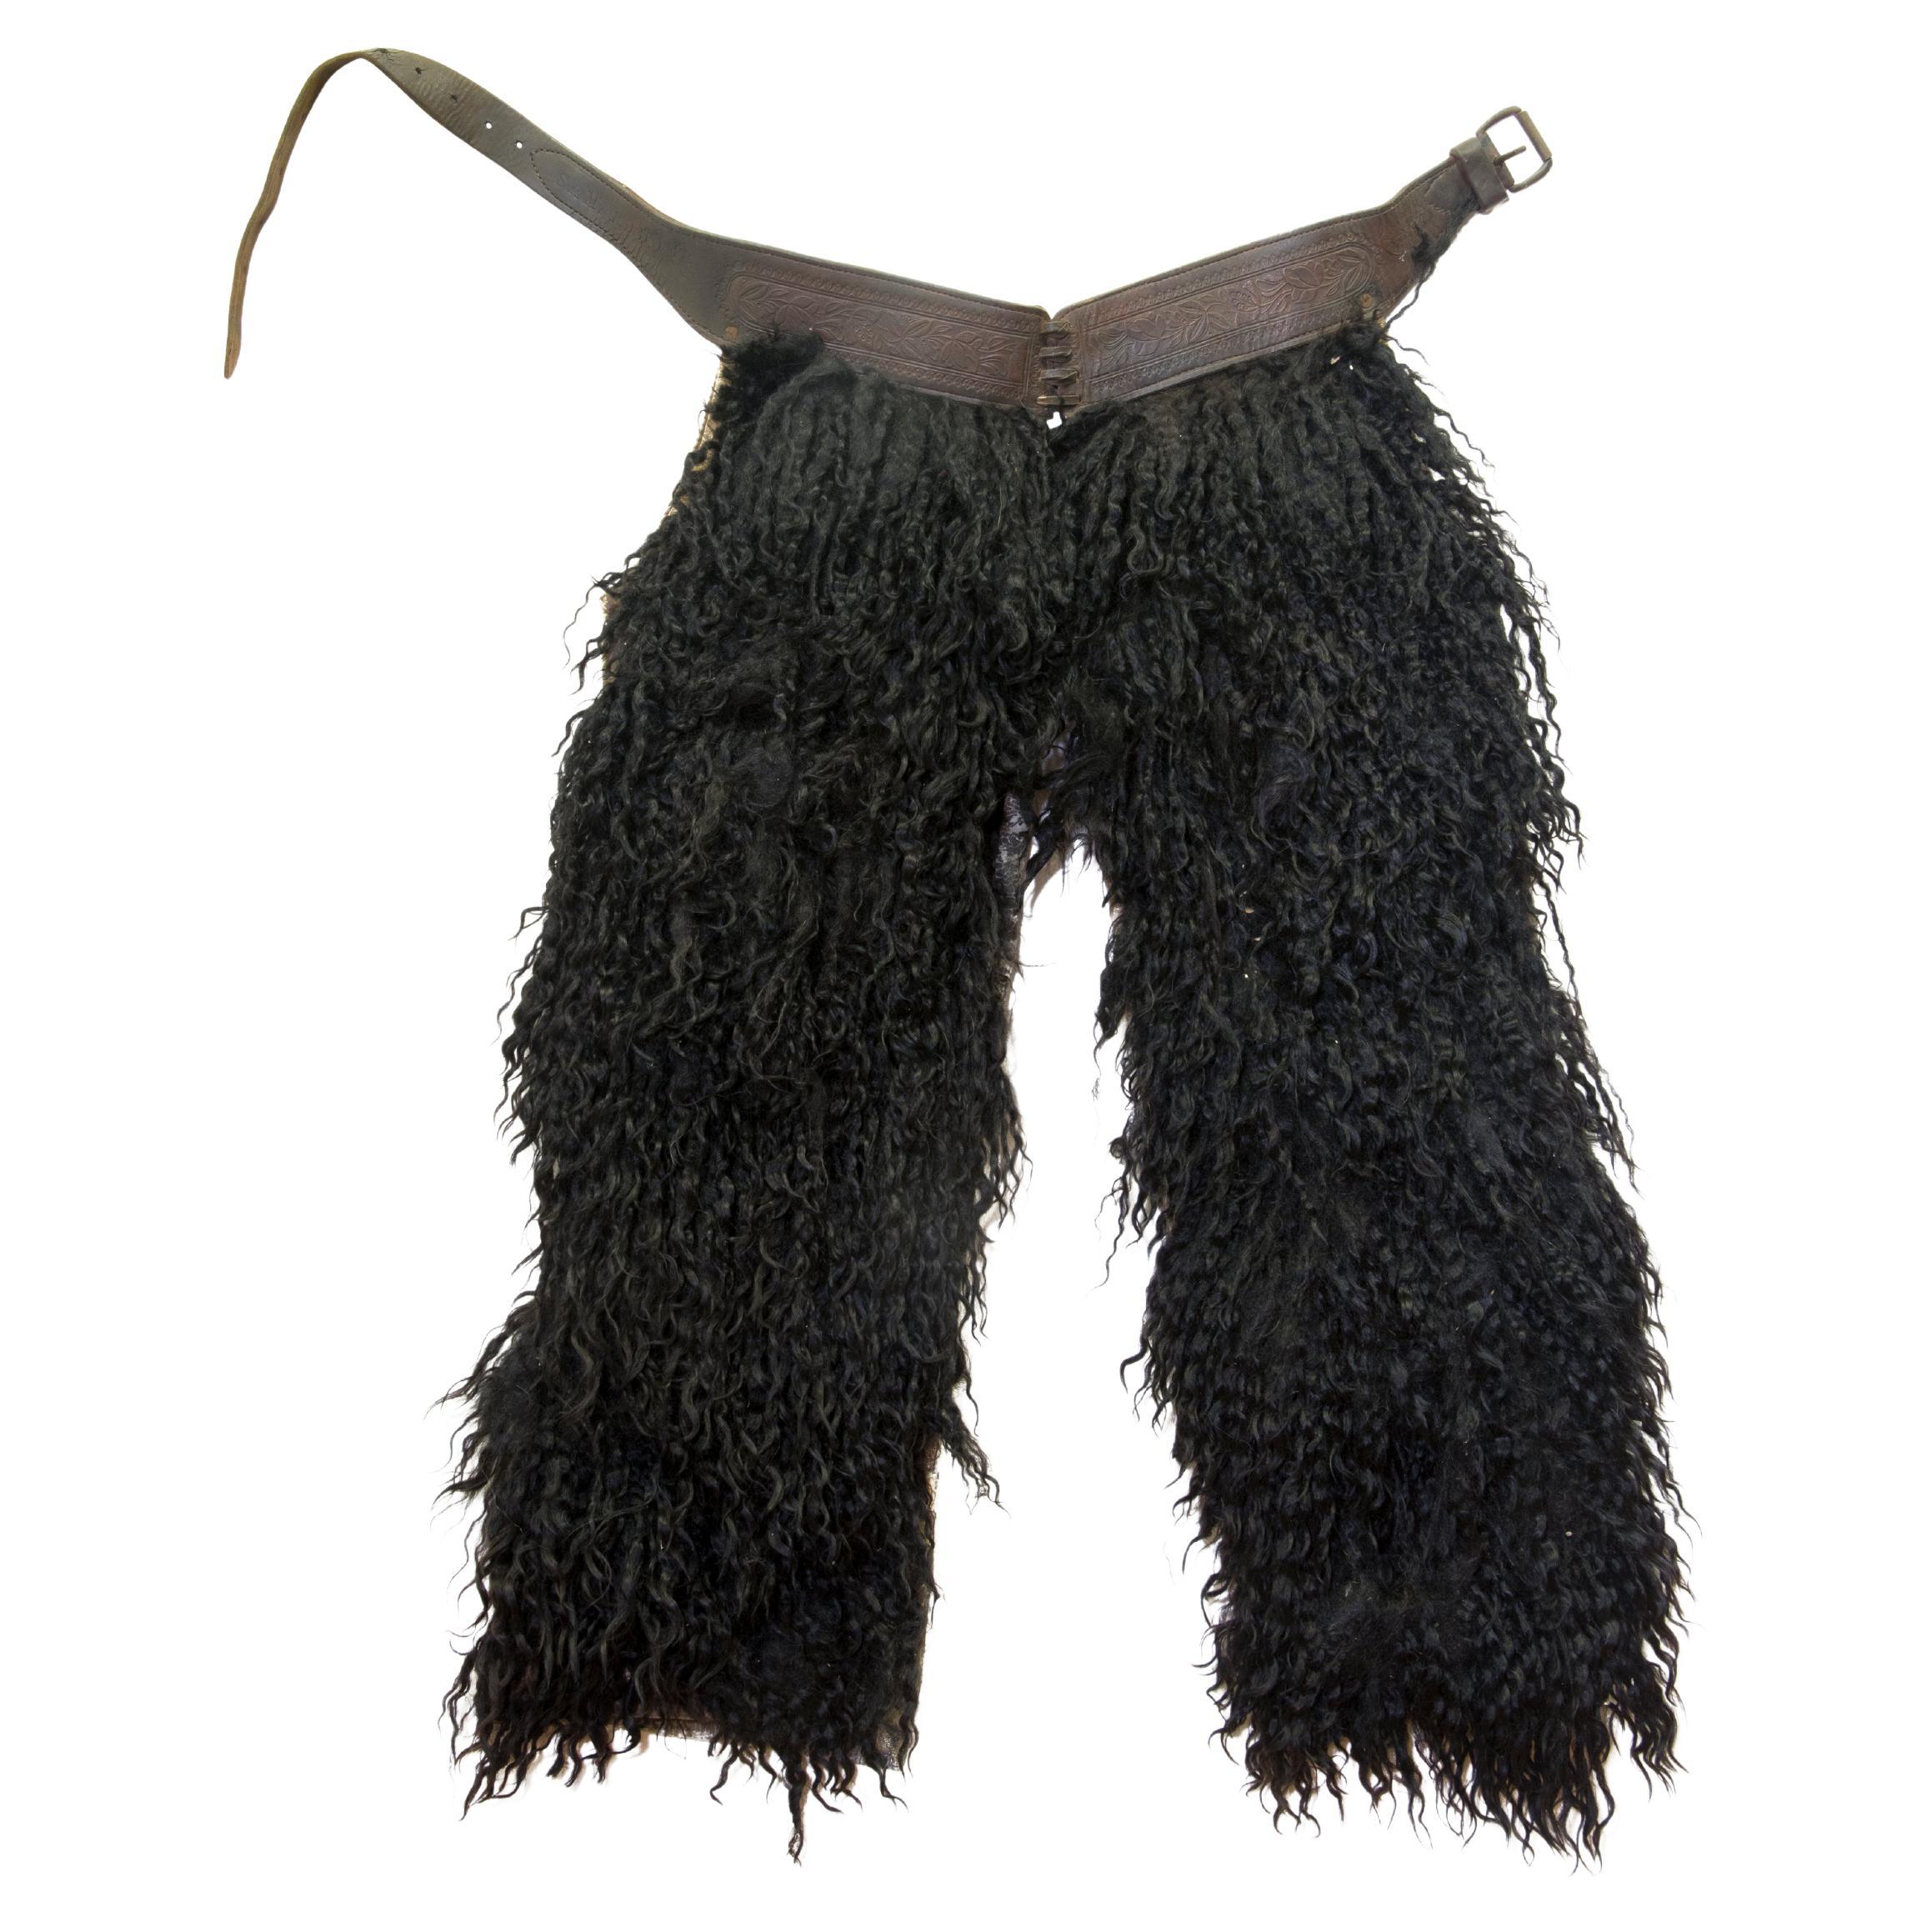 Black Wooly Chaps by Henry L. Kuck